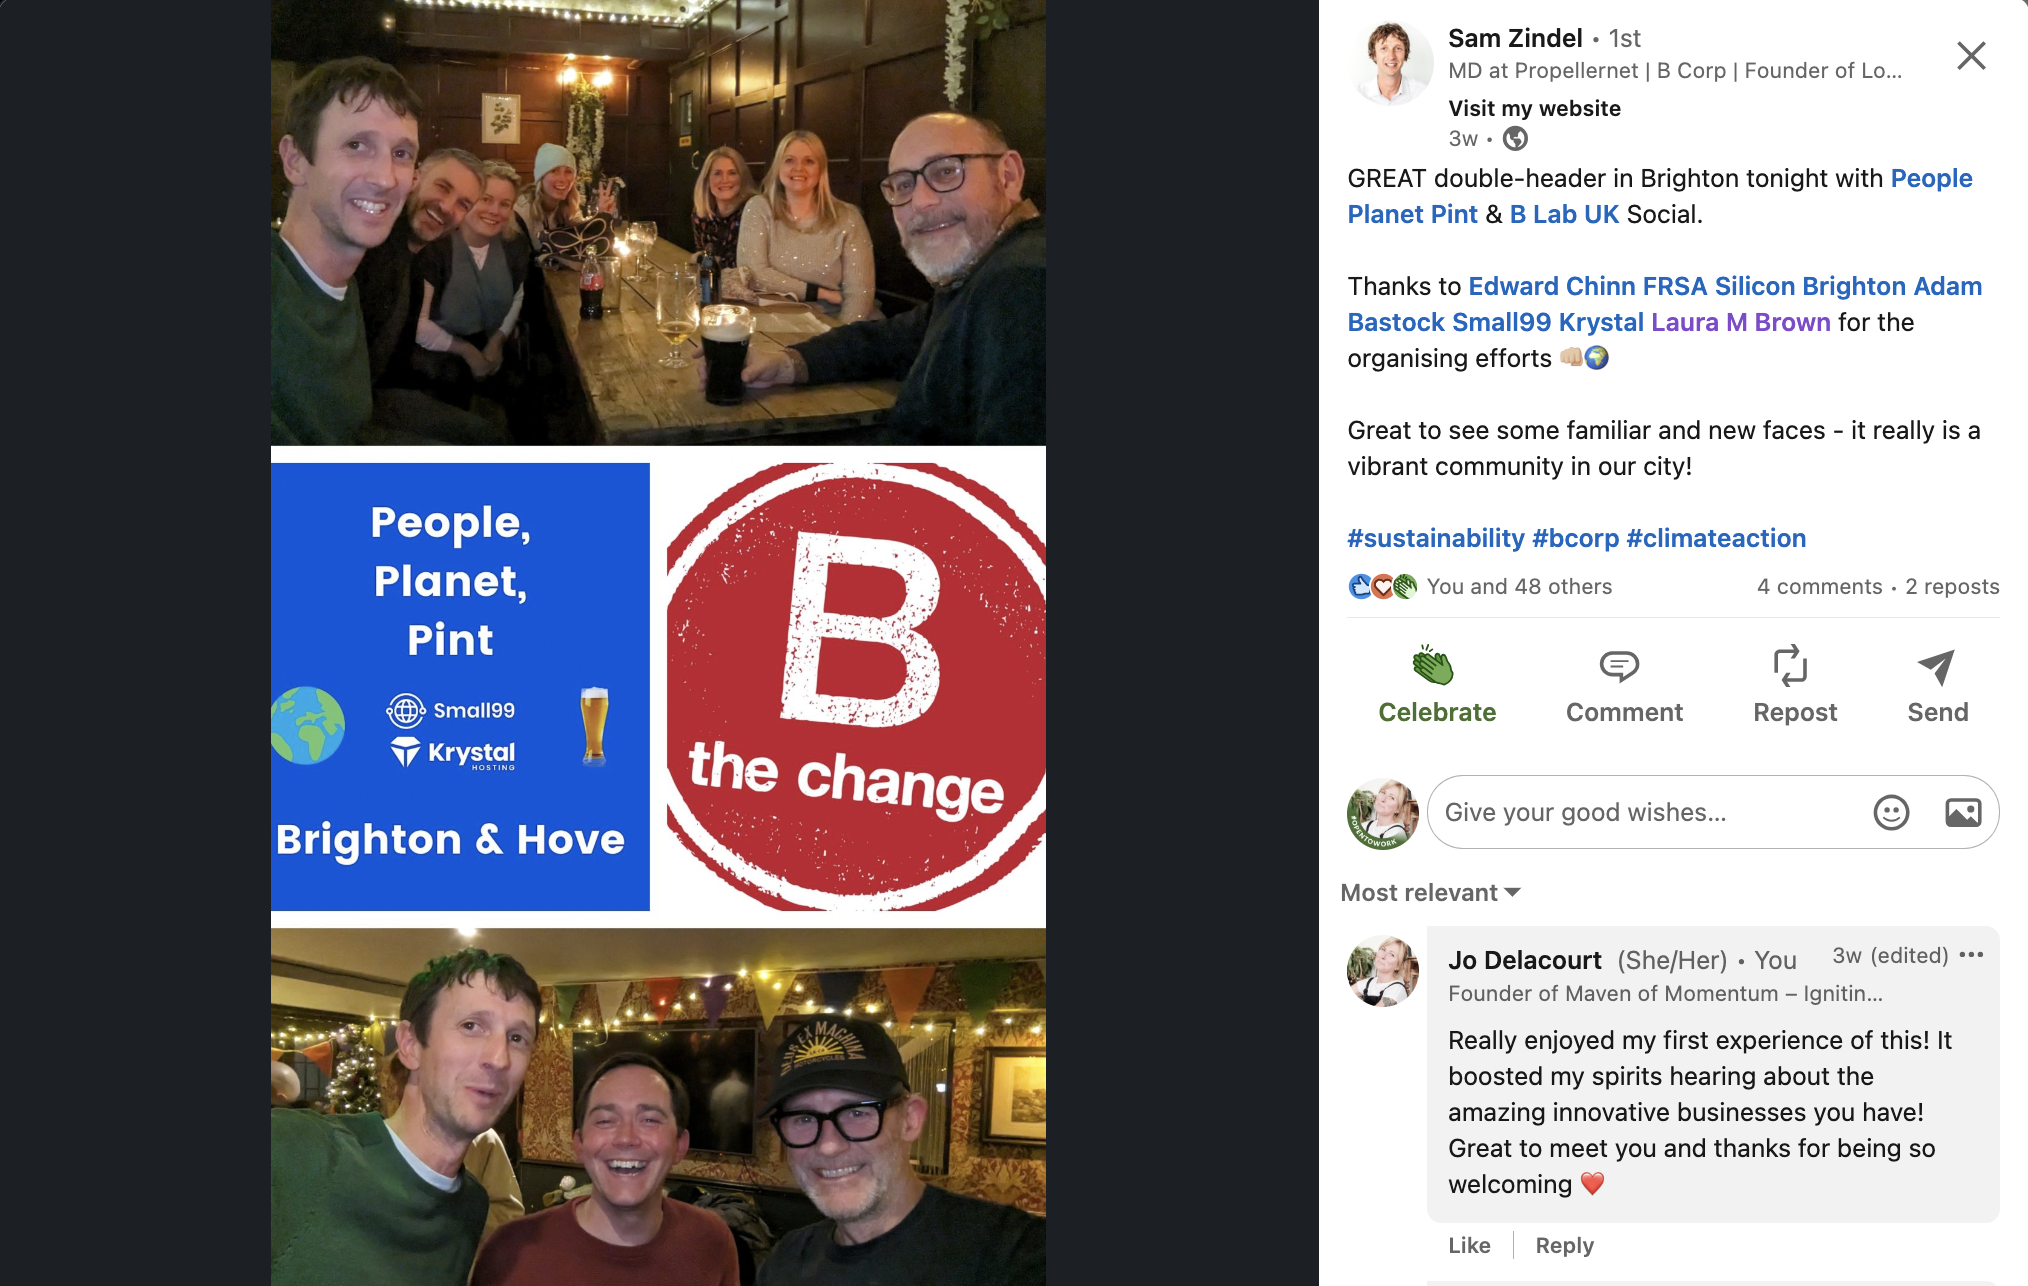 Screenshot of LinkedIn post about People Planet Pint and B Lab UK Social event in Brighton